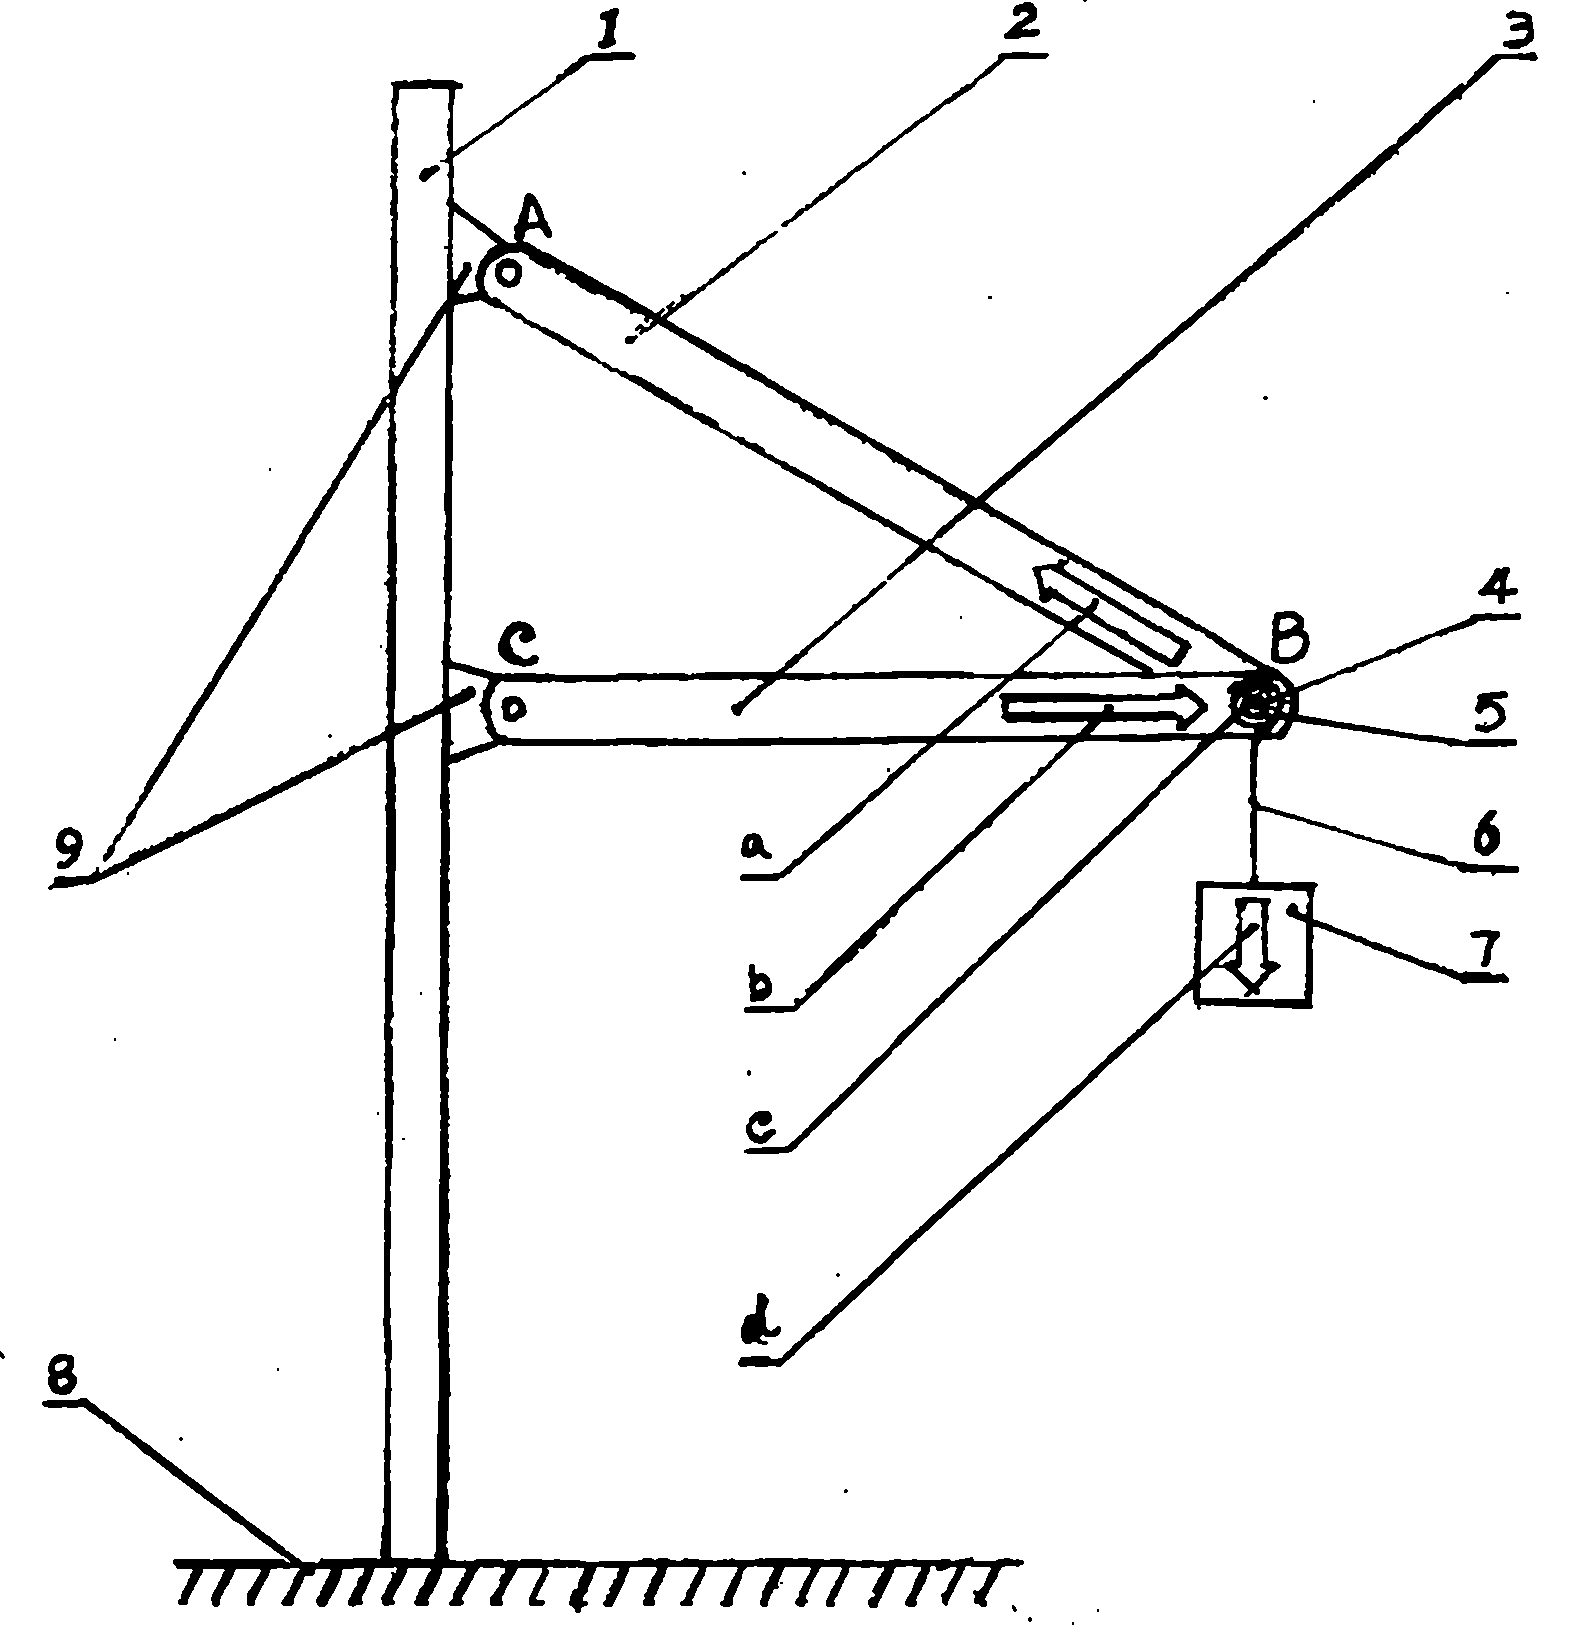 Demonstration apparatus for triangular component force bearing analysis